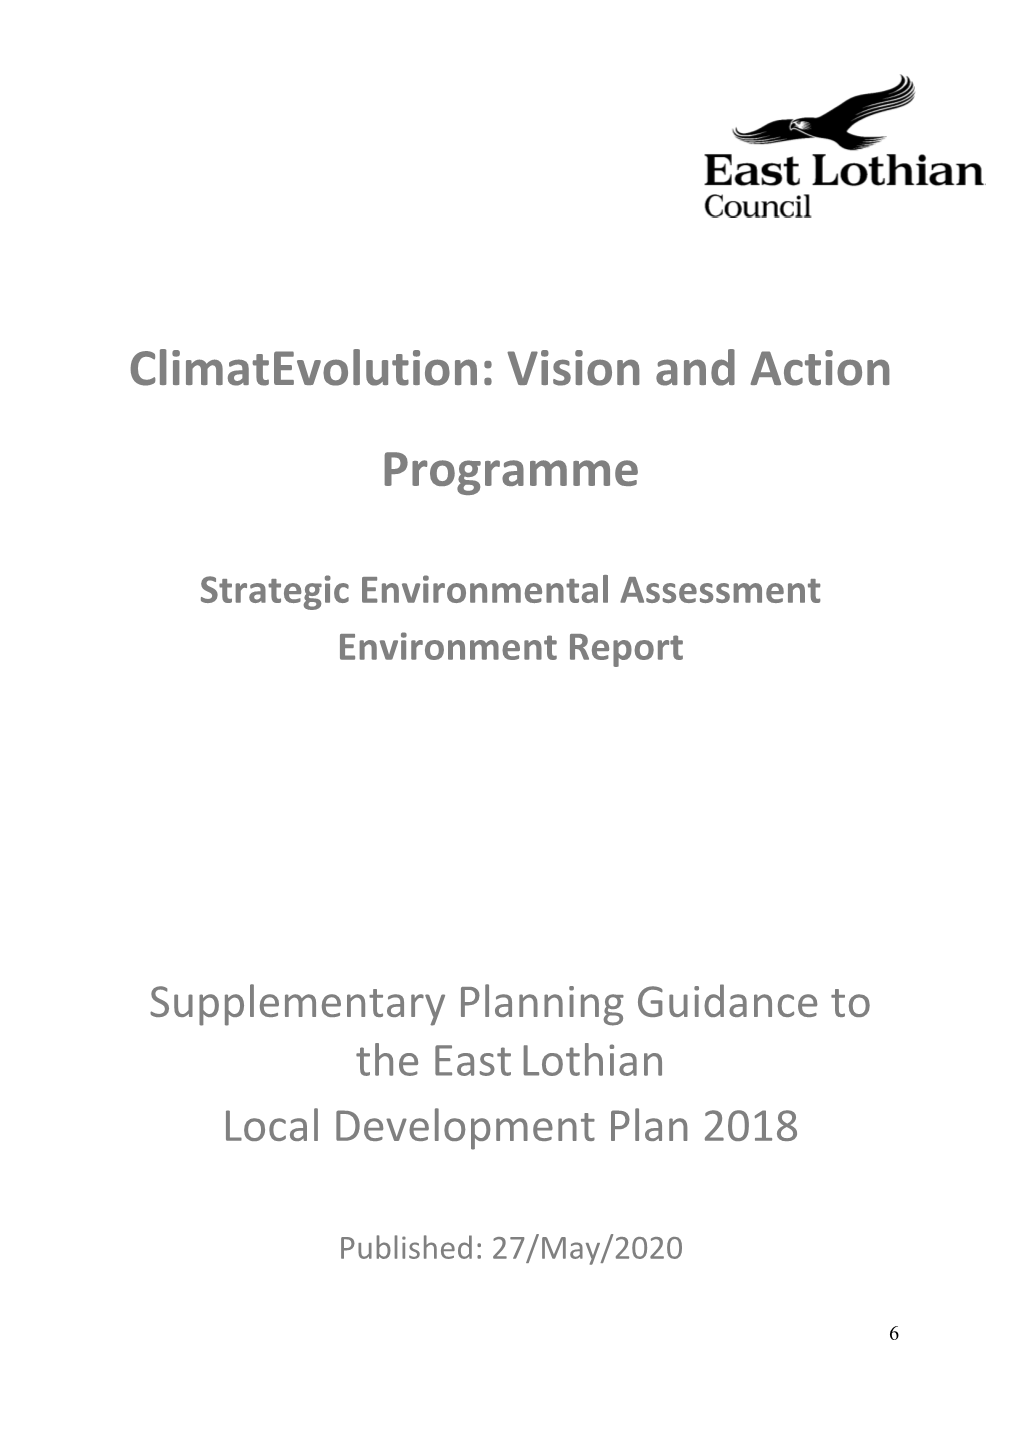 Climatevolution: Vision and Action Programme